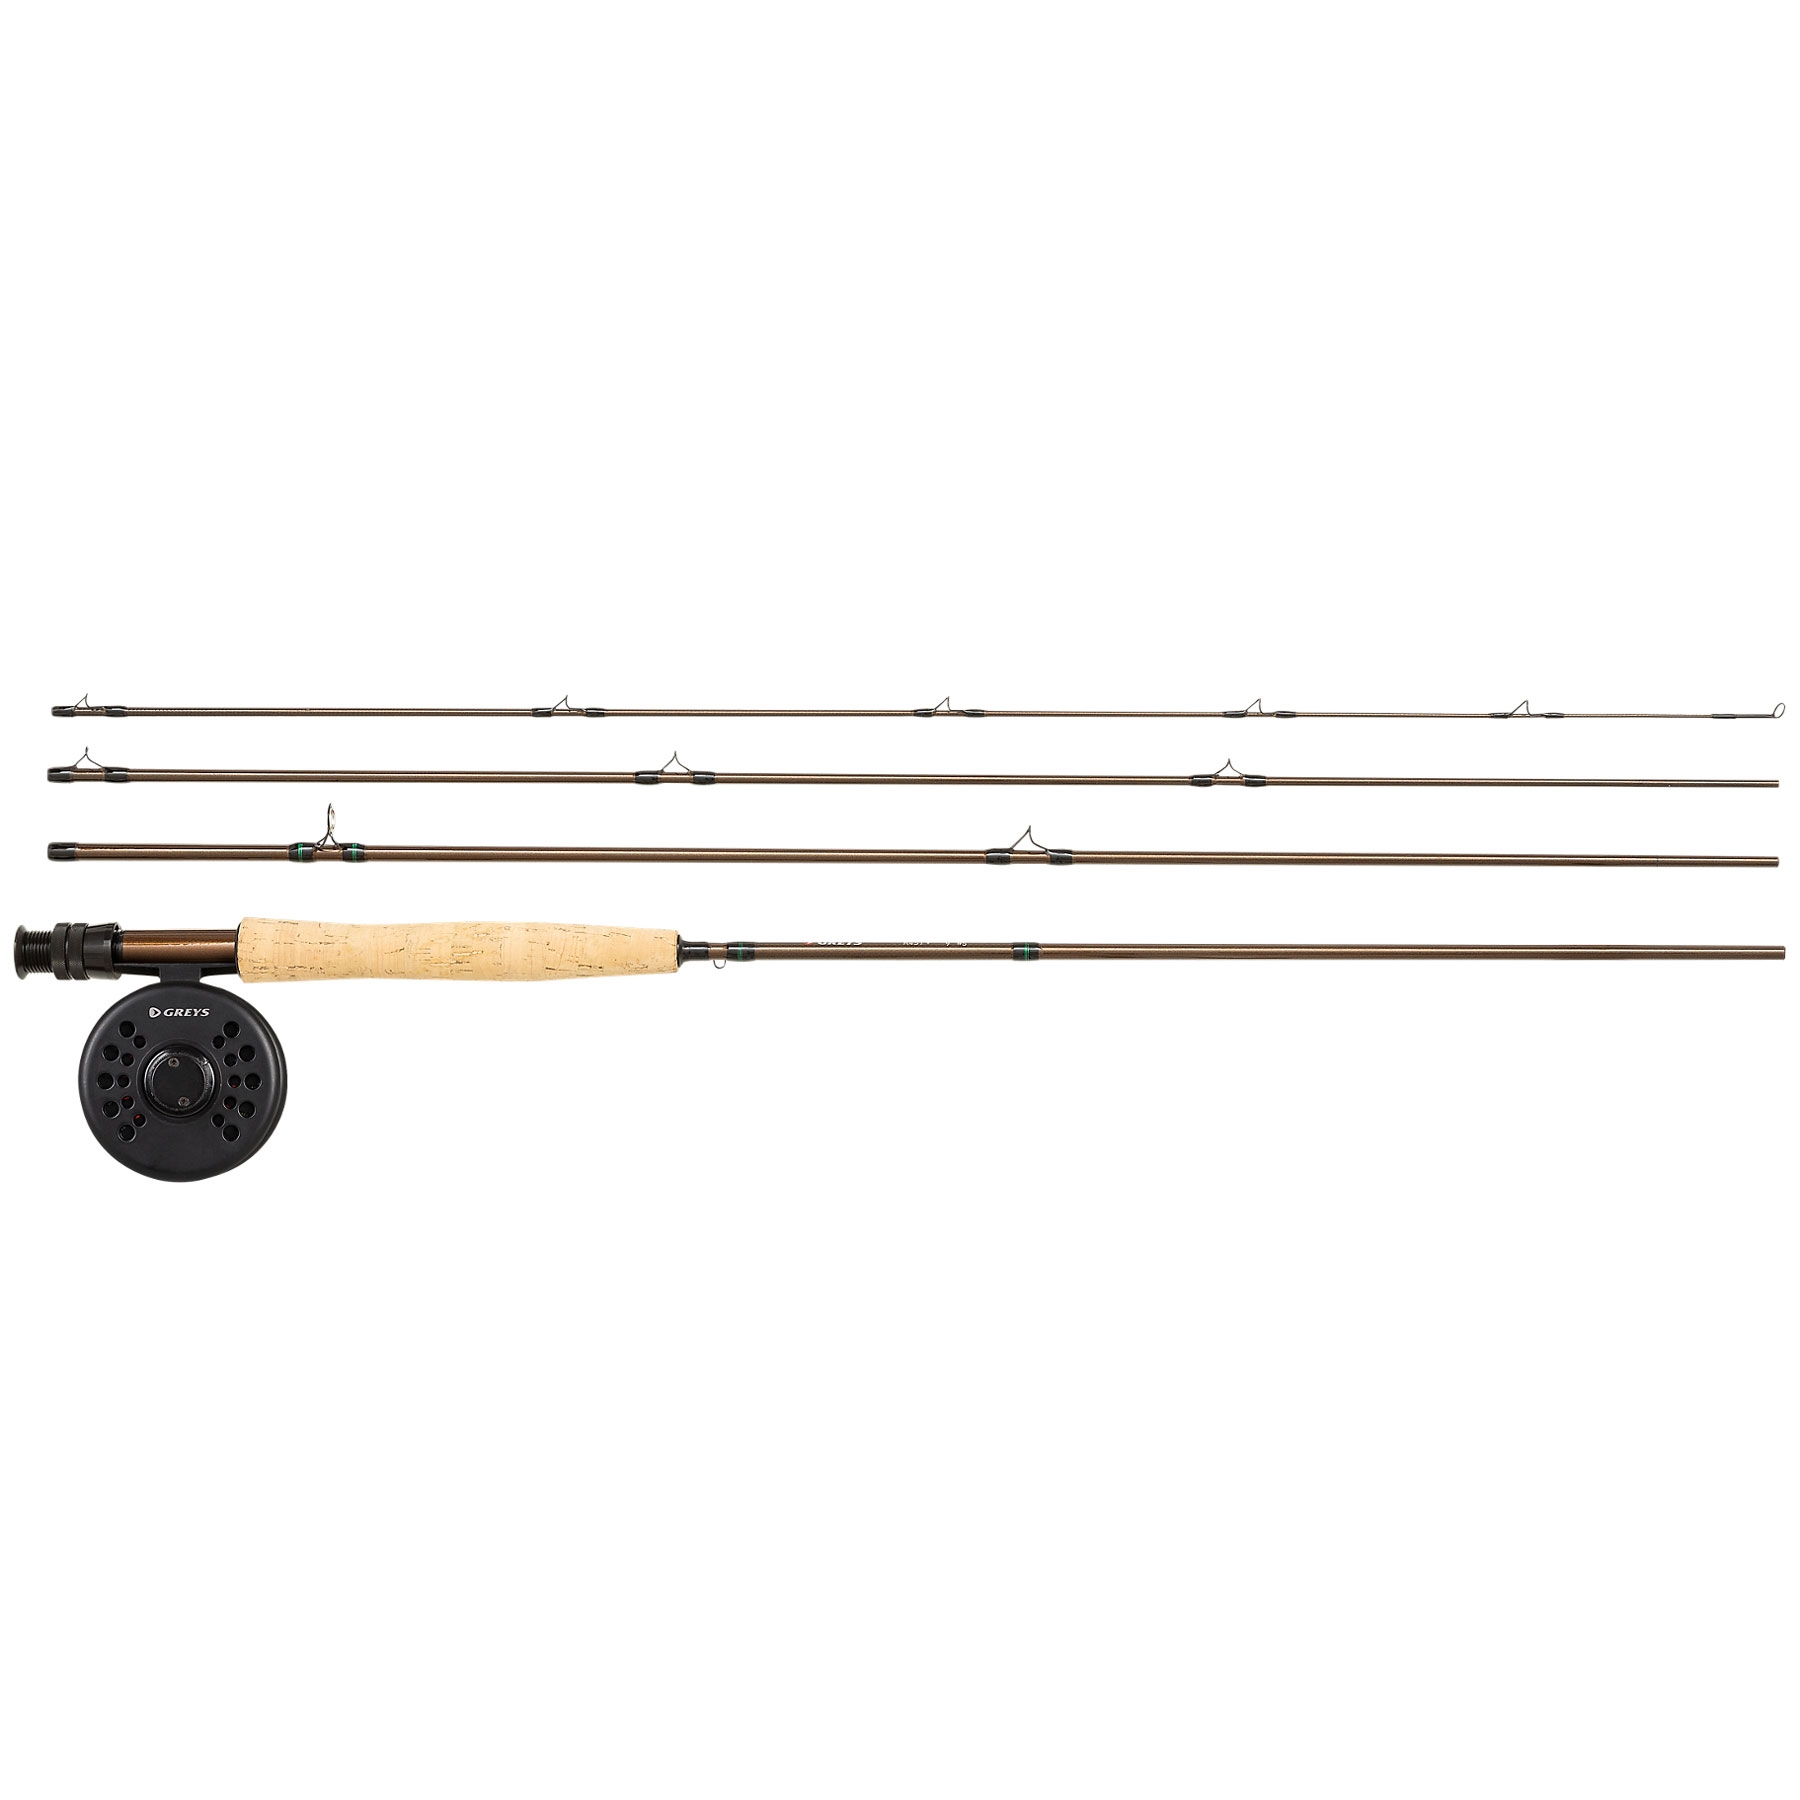 Greys K4ST + Plus Combos - Fly Fishing Rods Outfits Kits